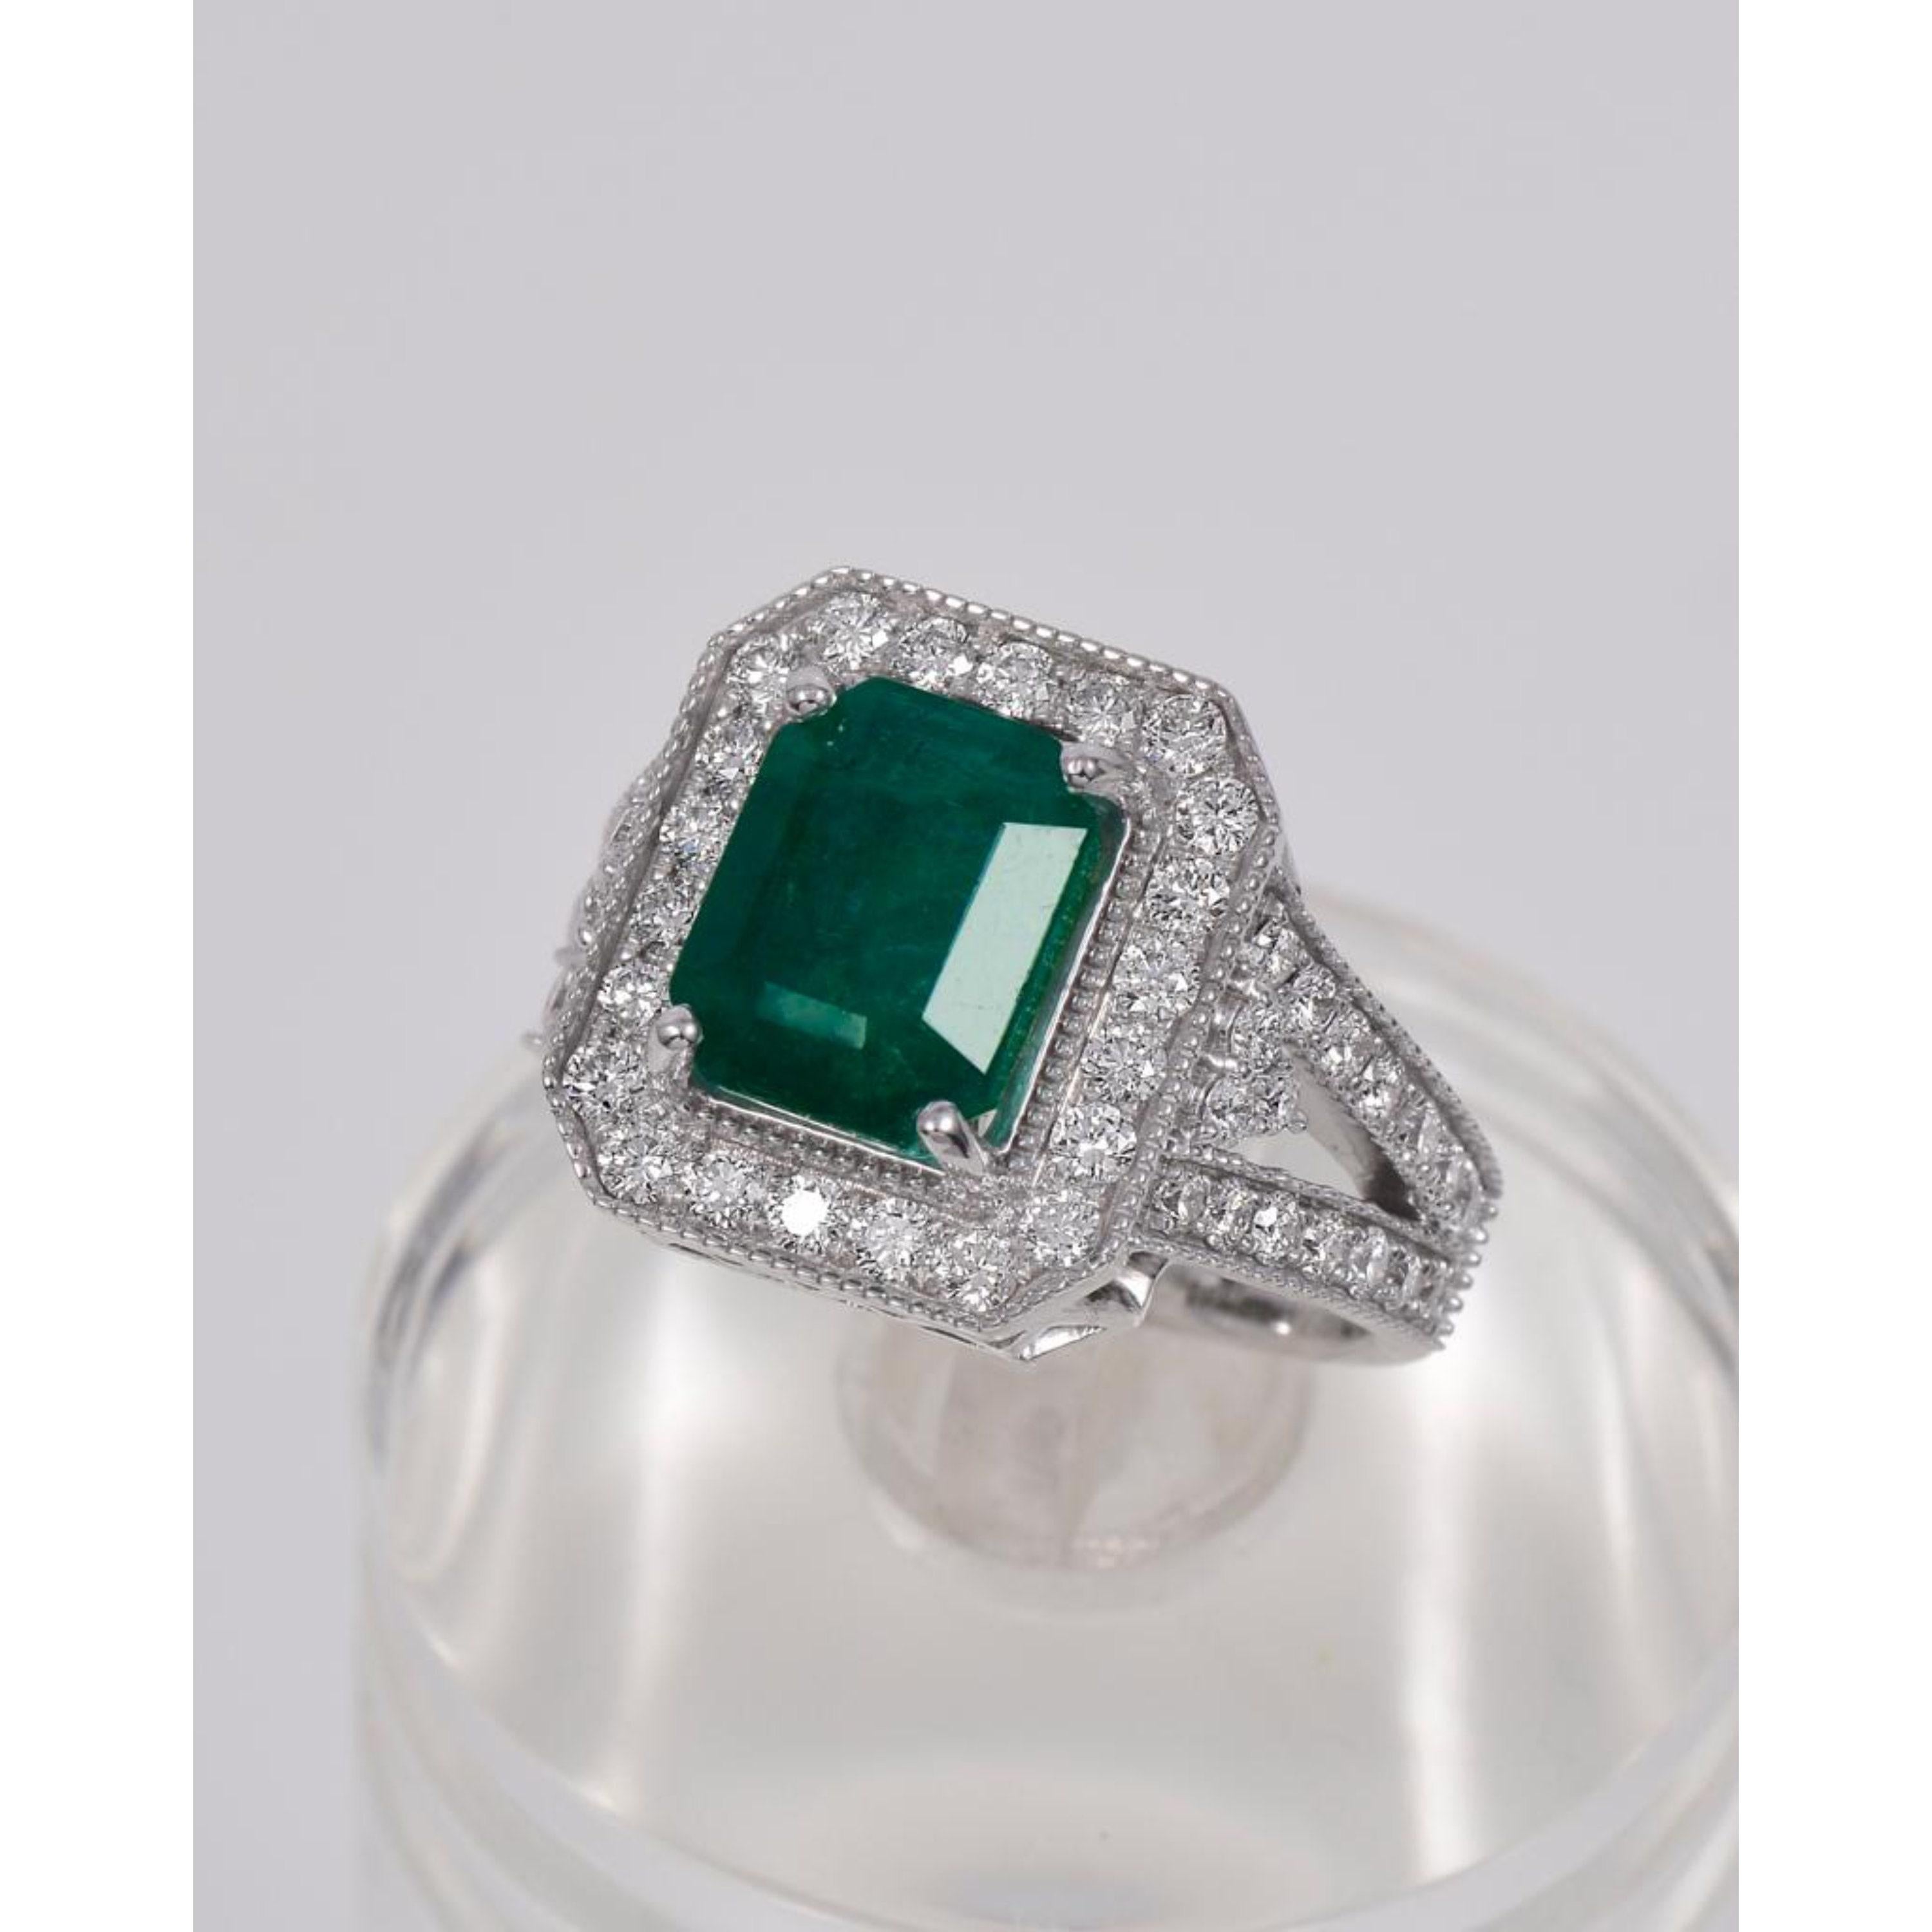 For Sale:  Art Deco 3.01 Carat Emerald and Diamond White Gold Engagement Ring Wedding Ring 8